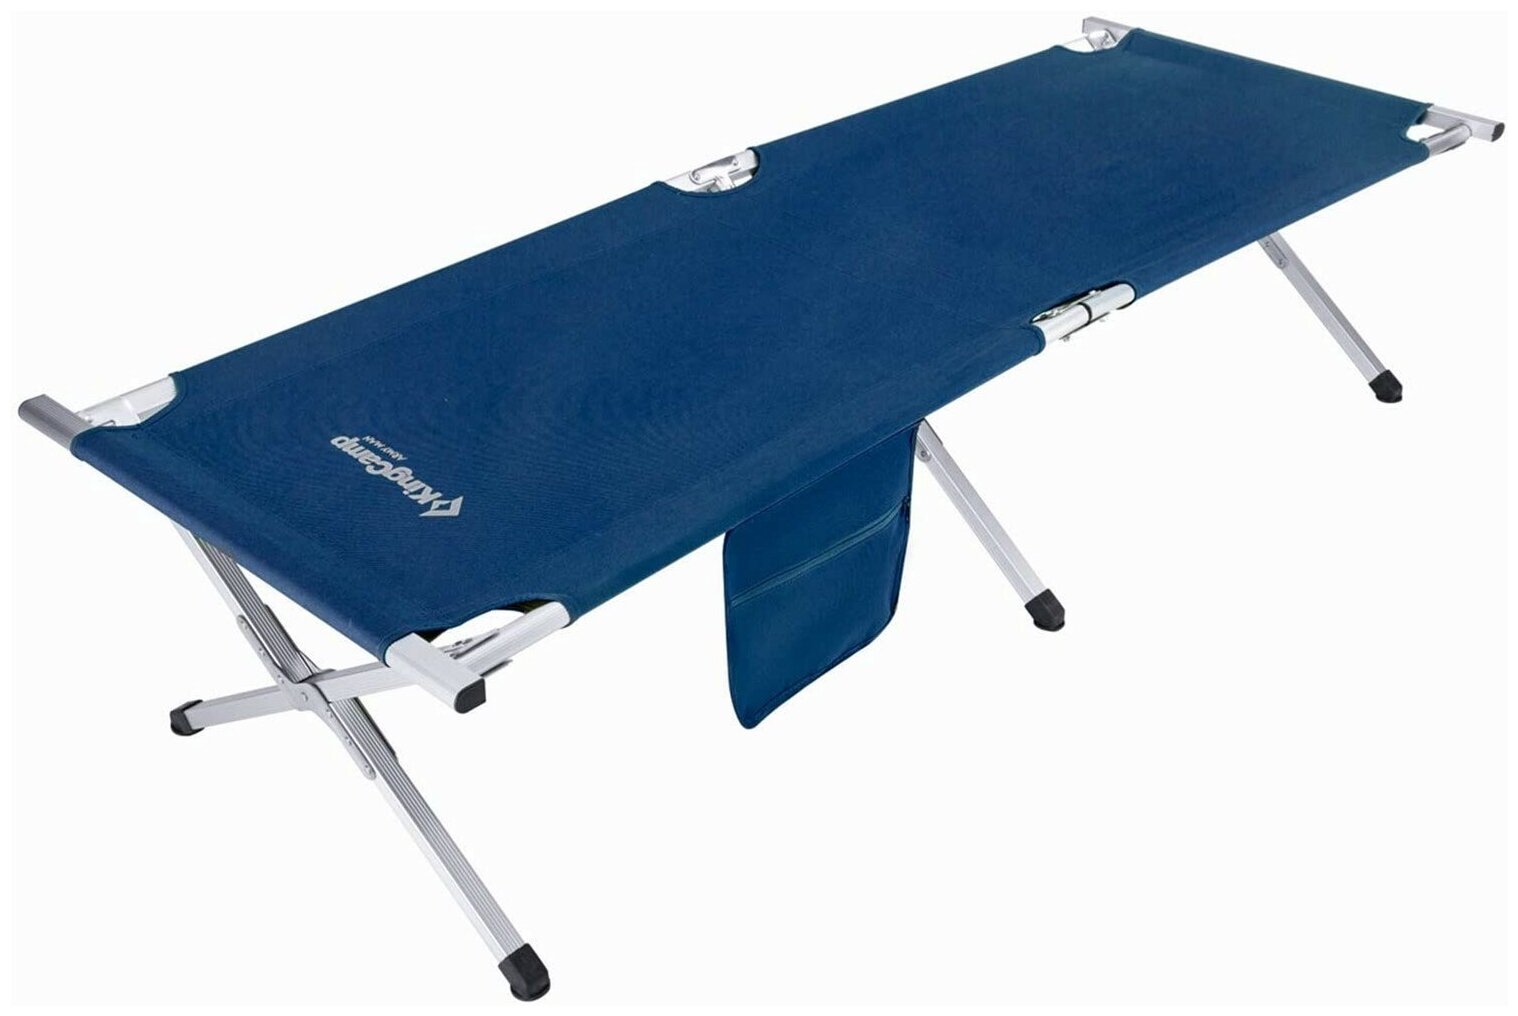    King Camp Armyman Camping Bed 3806A Blue